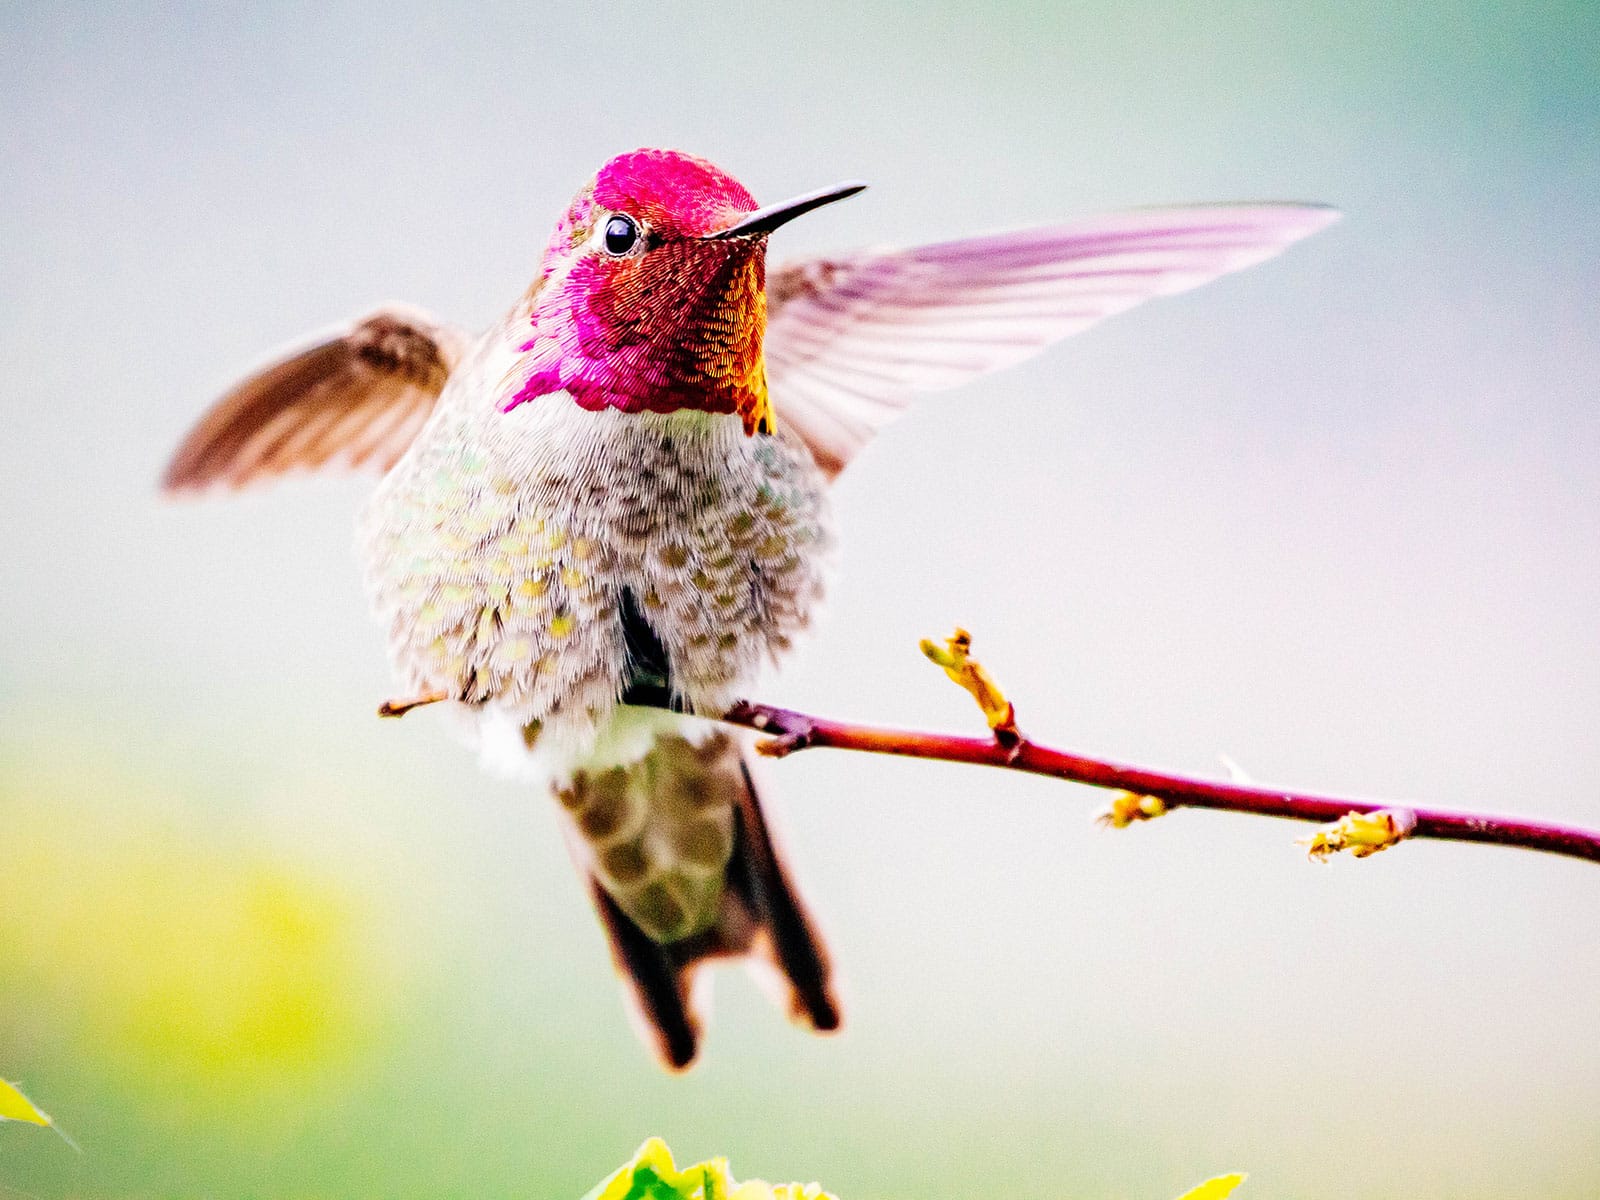 A visual guide to identifying common hummingbirds in the garden